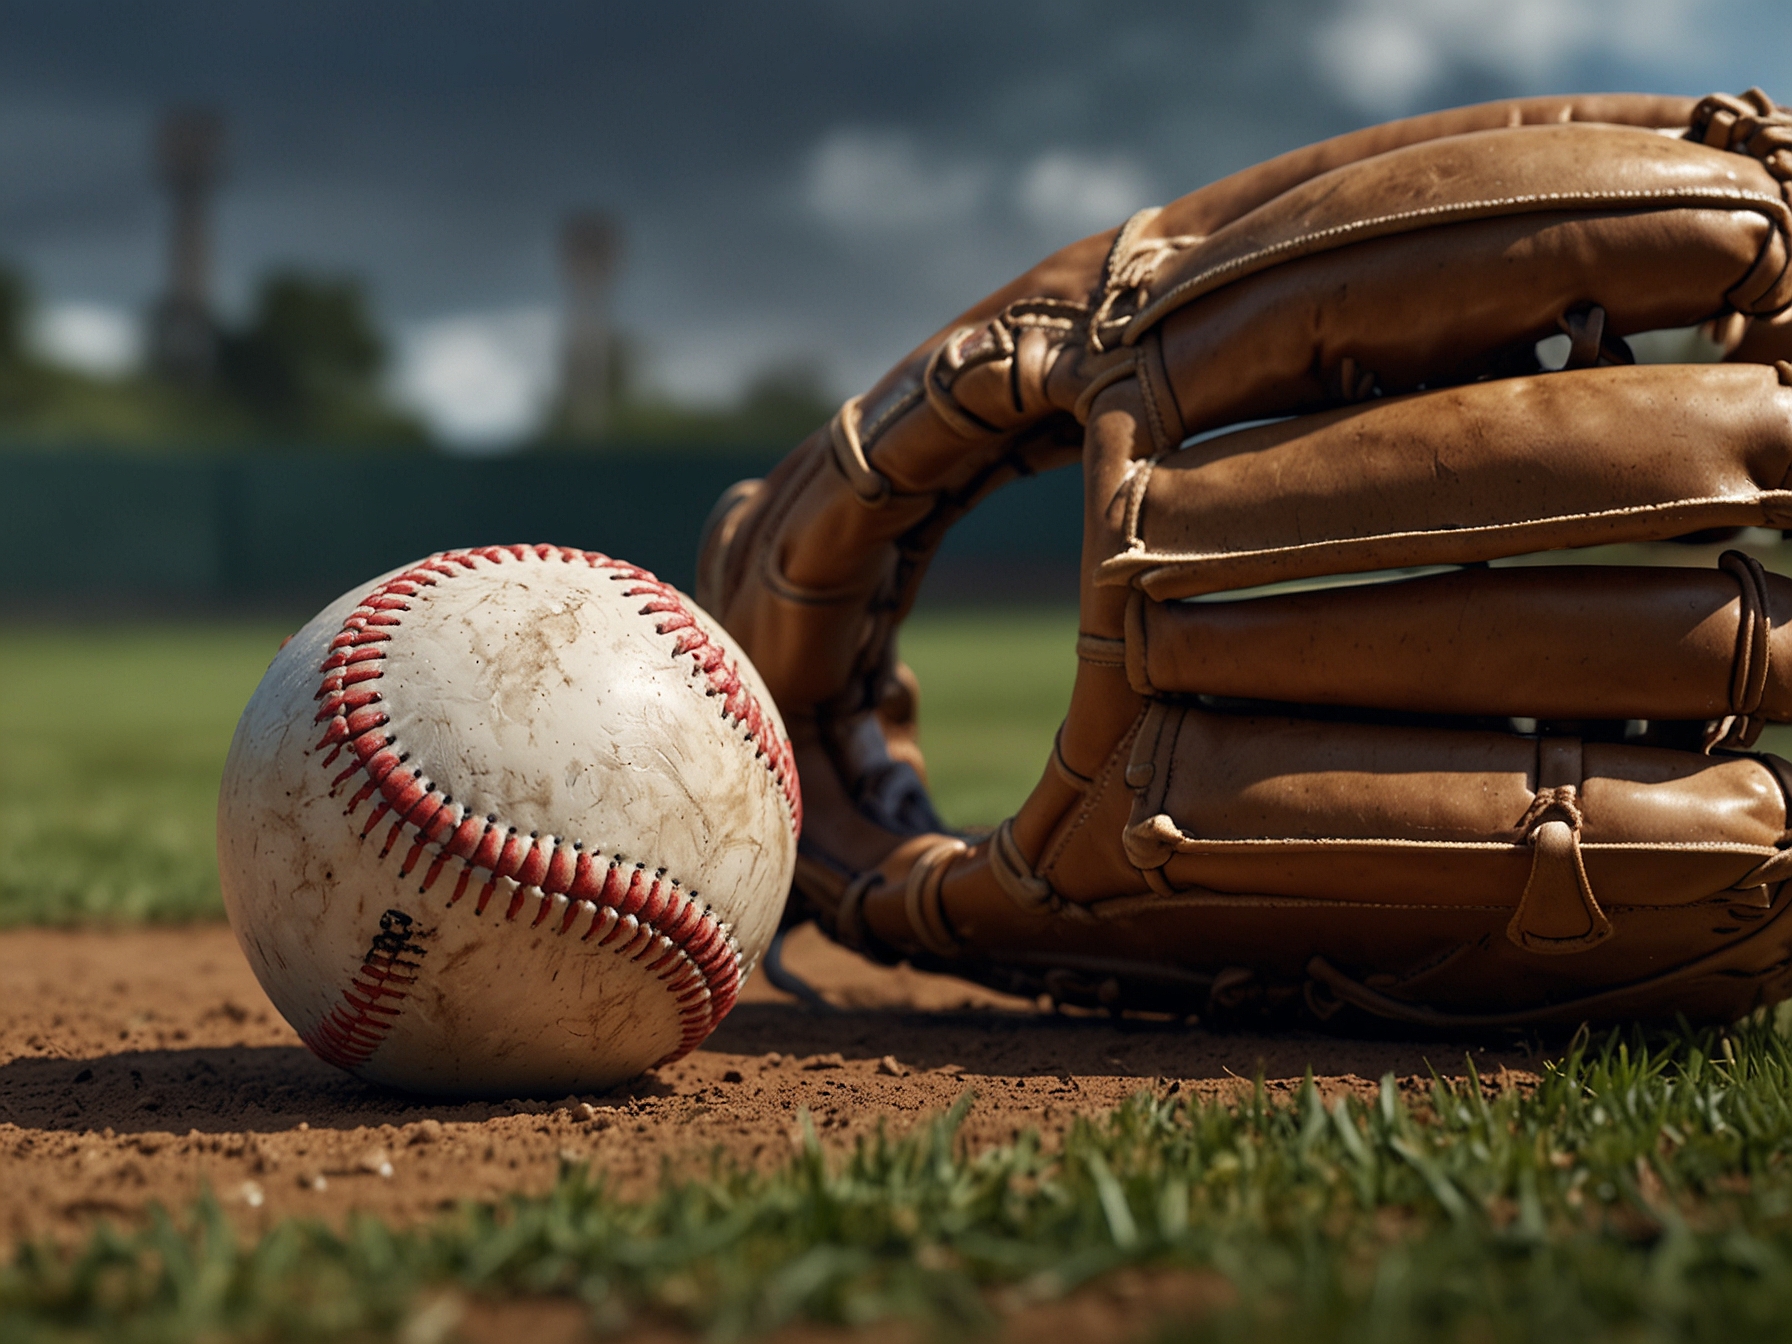 Close-up of a baseball glove and ball on the field, symbolizing the sport and the game's intensity.